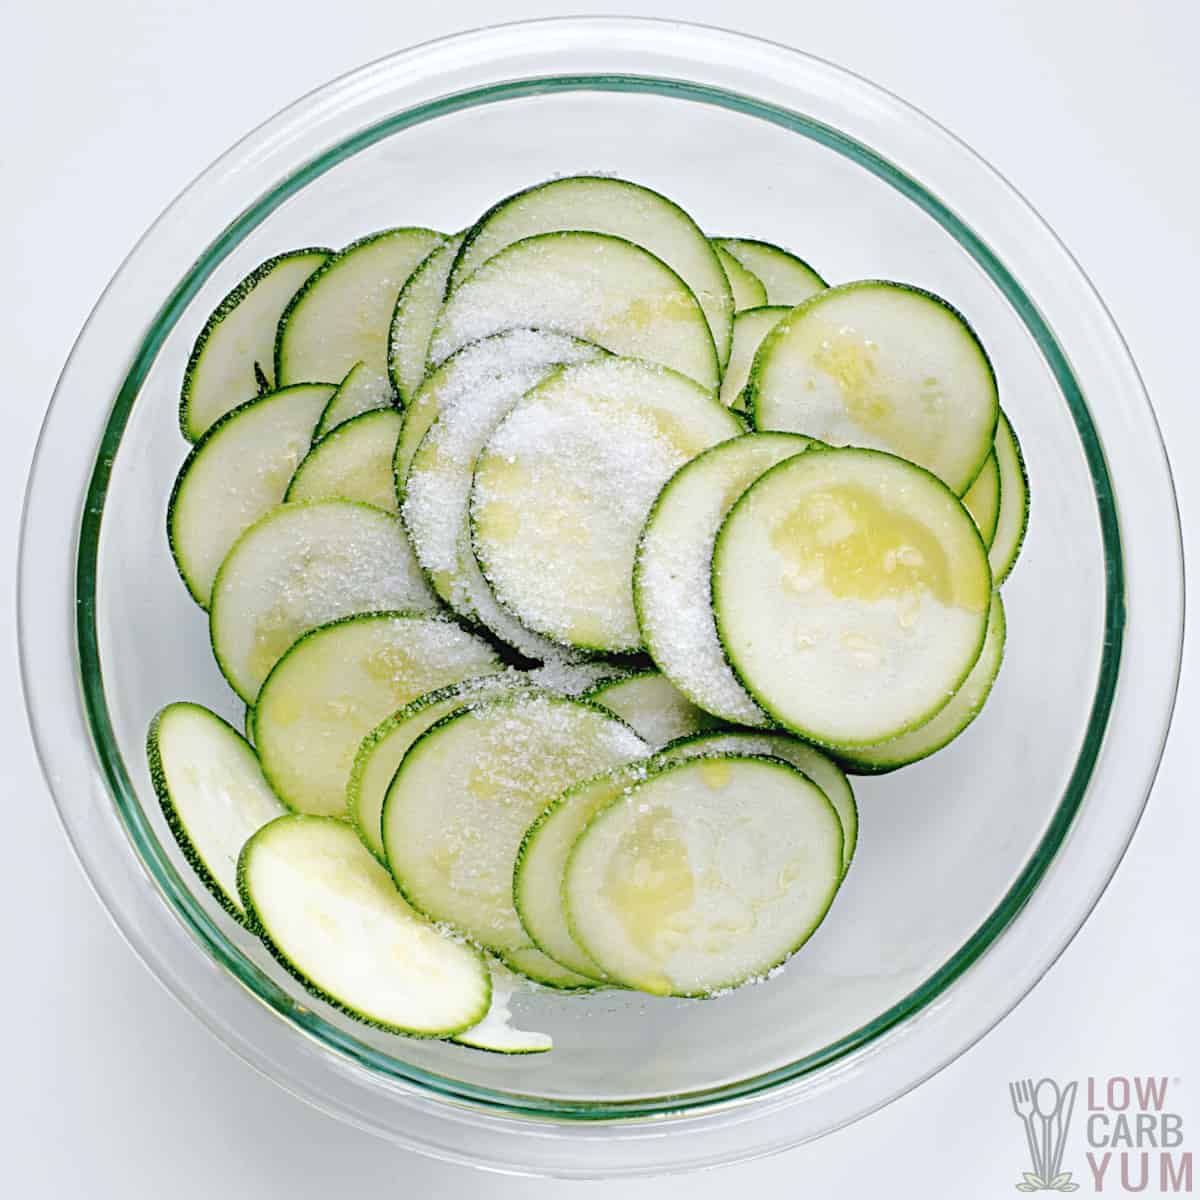 salt and oil added to zucchini slices.